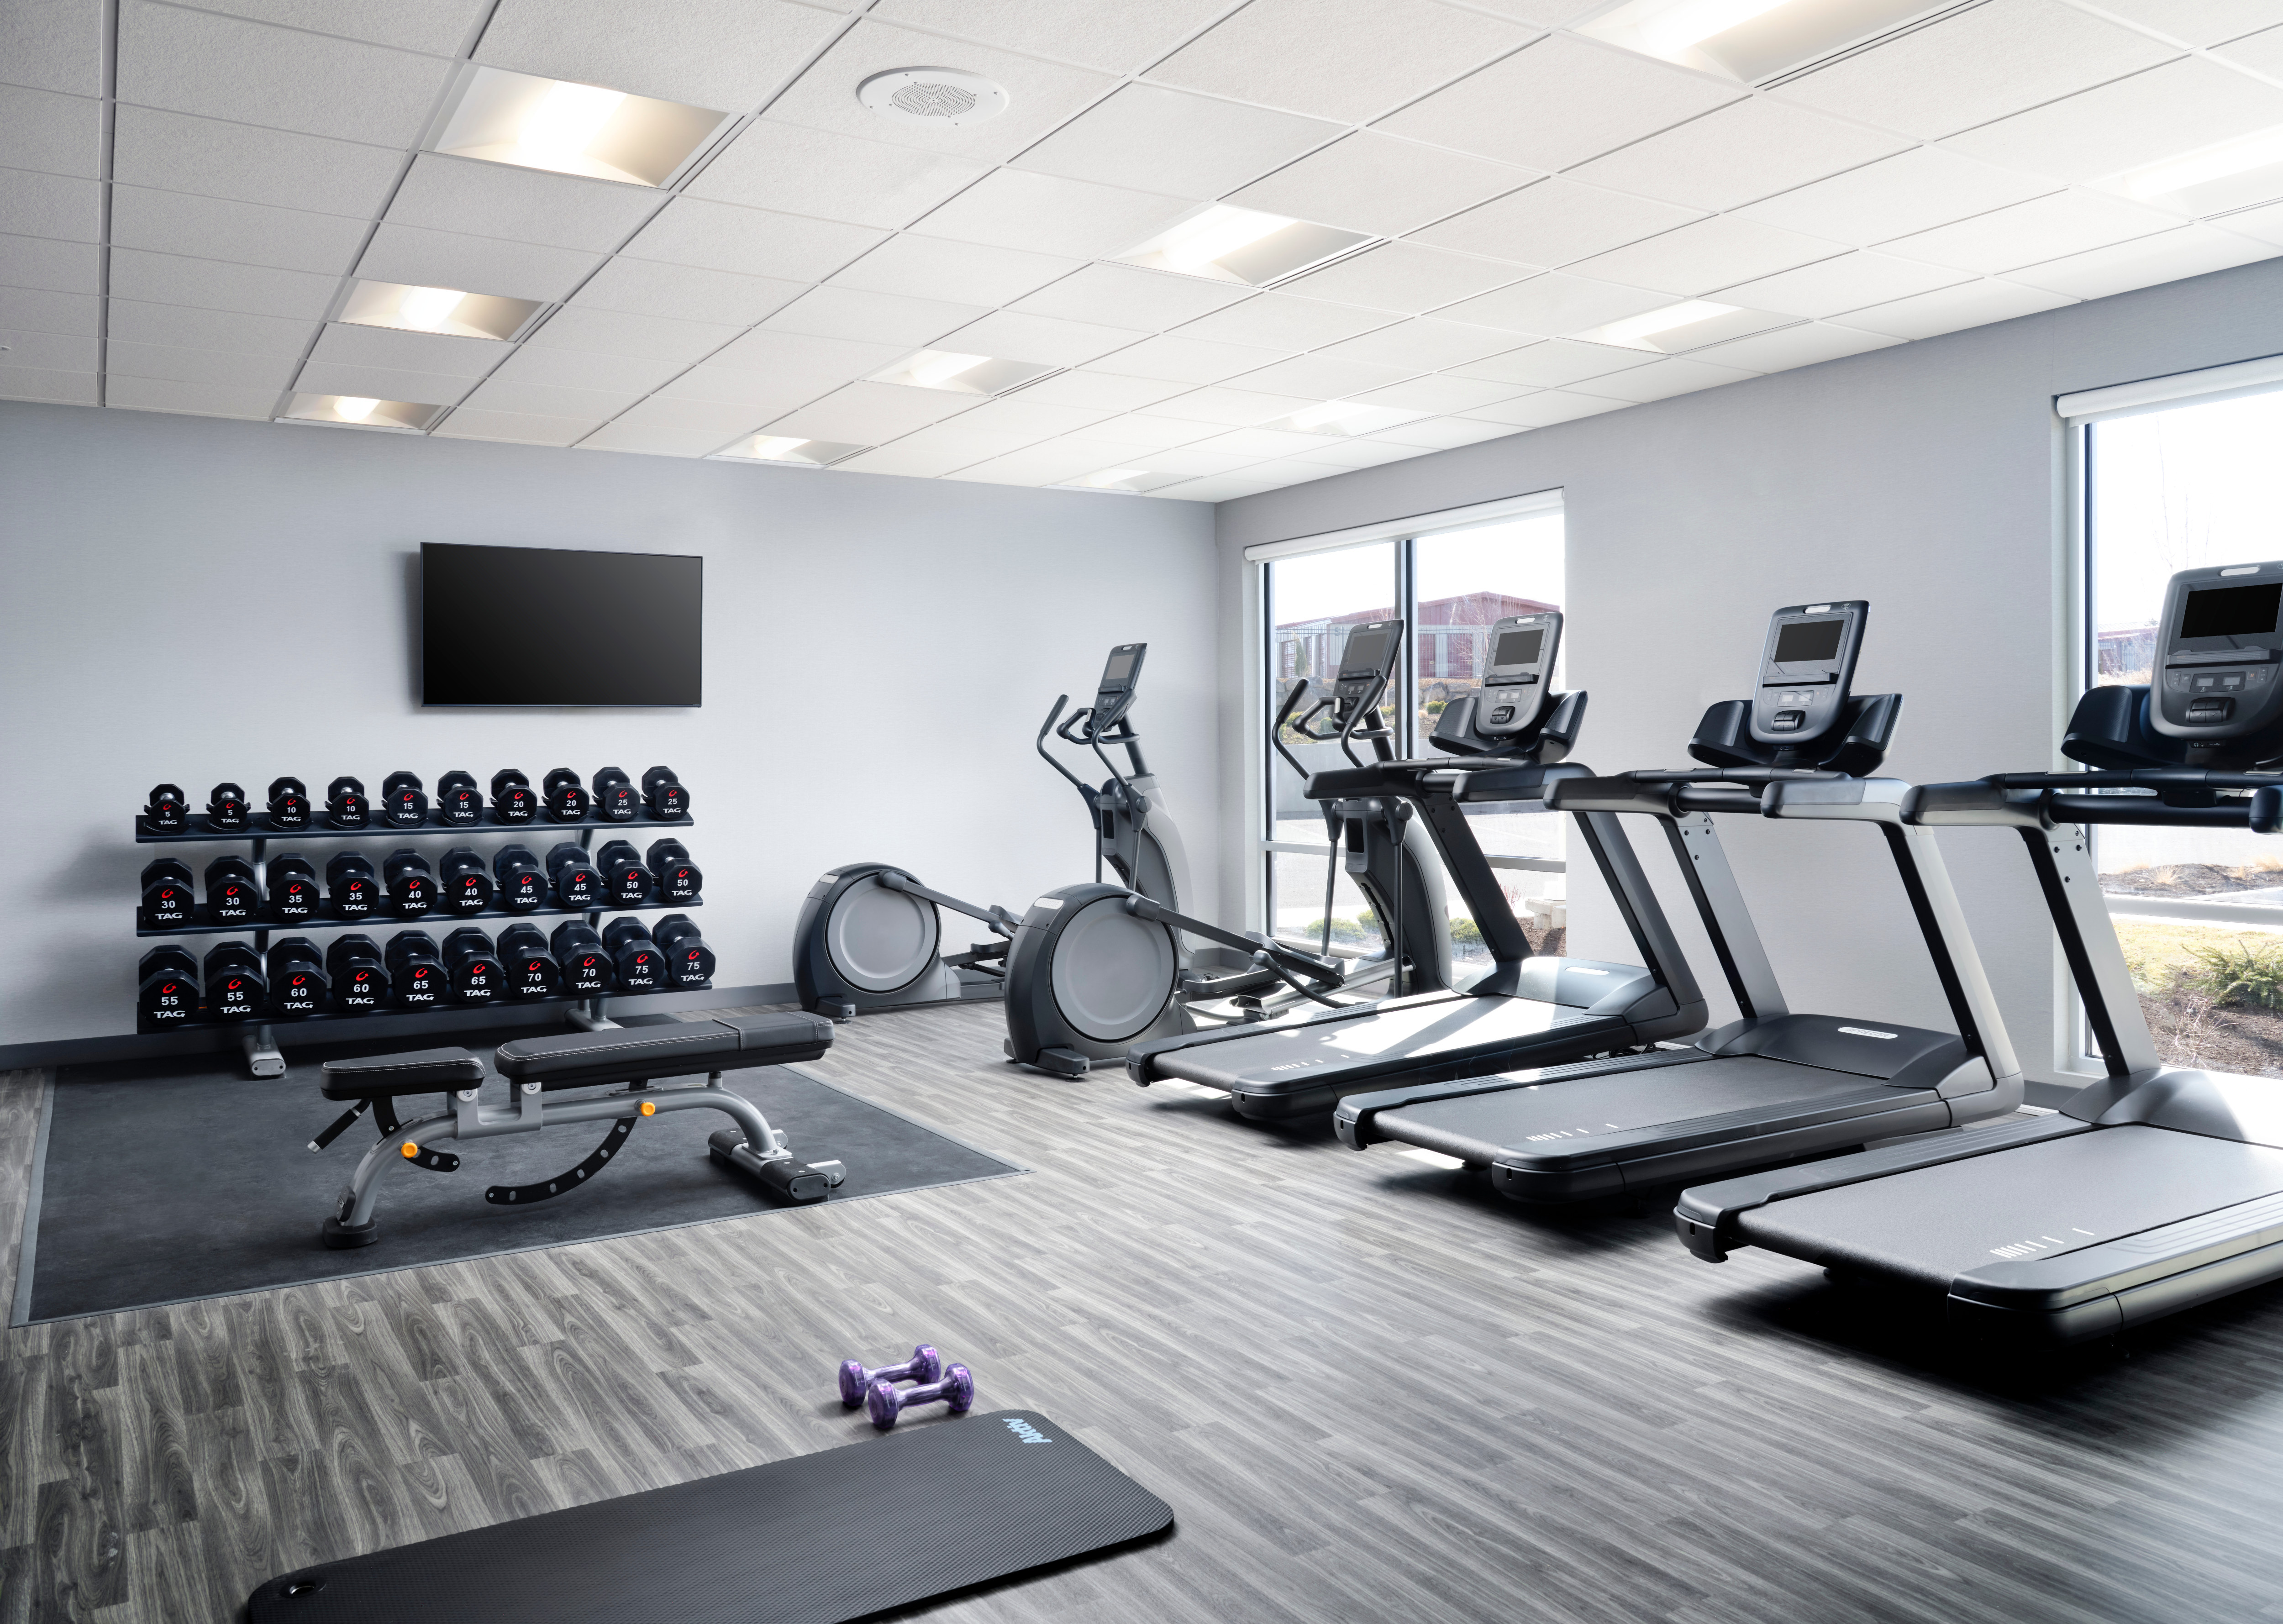 Fitness Center with Treadmills Recumbent Bikes Weights and HDTV